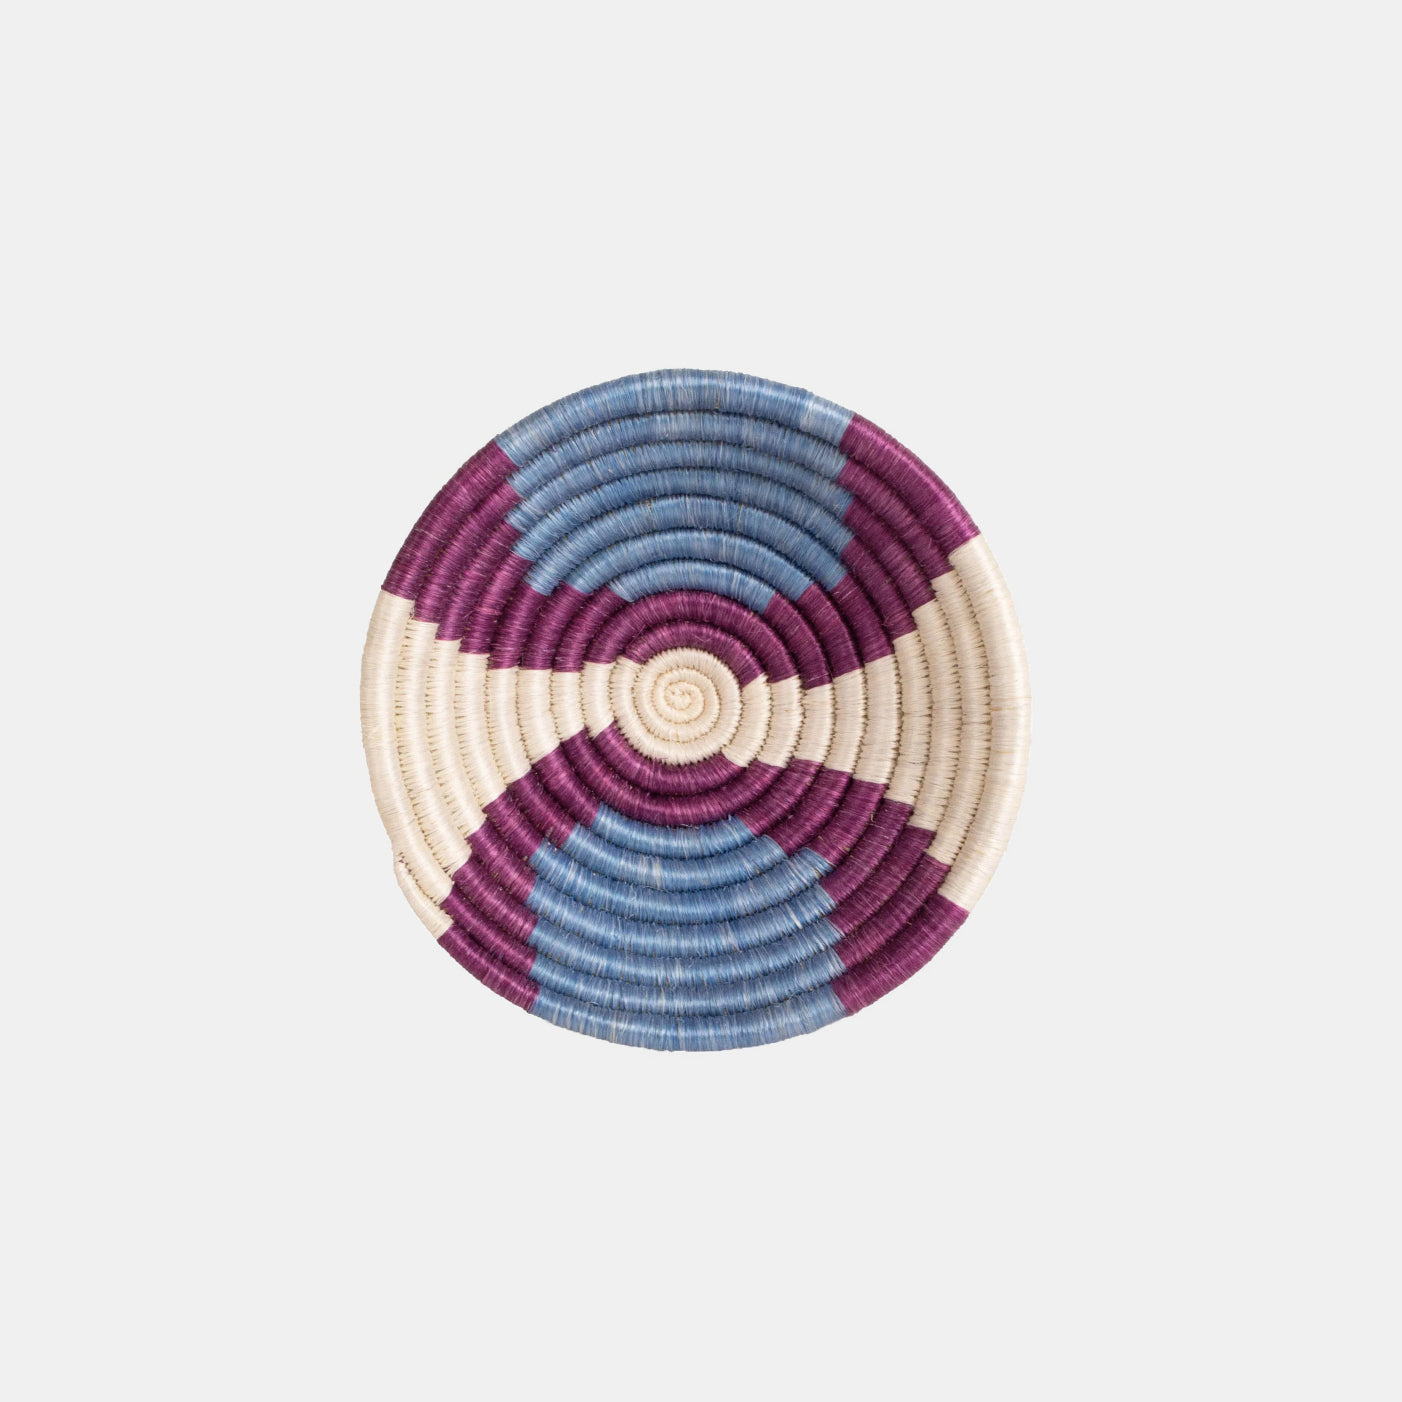 Small Harmony Synthesis Woven Bowl